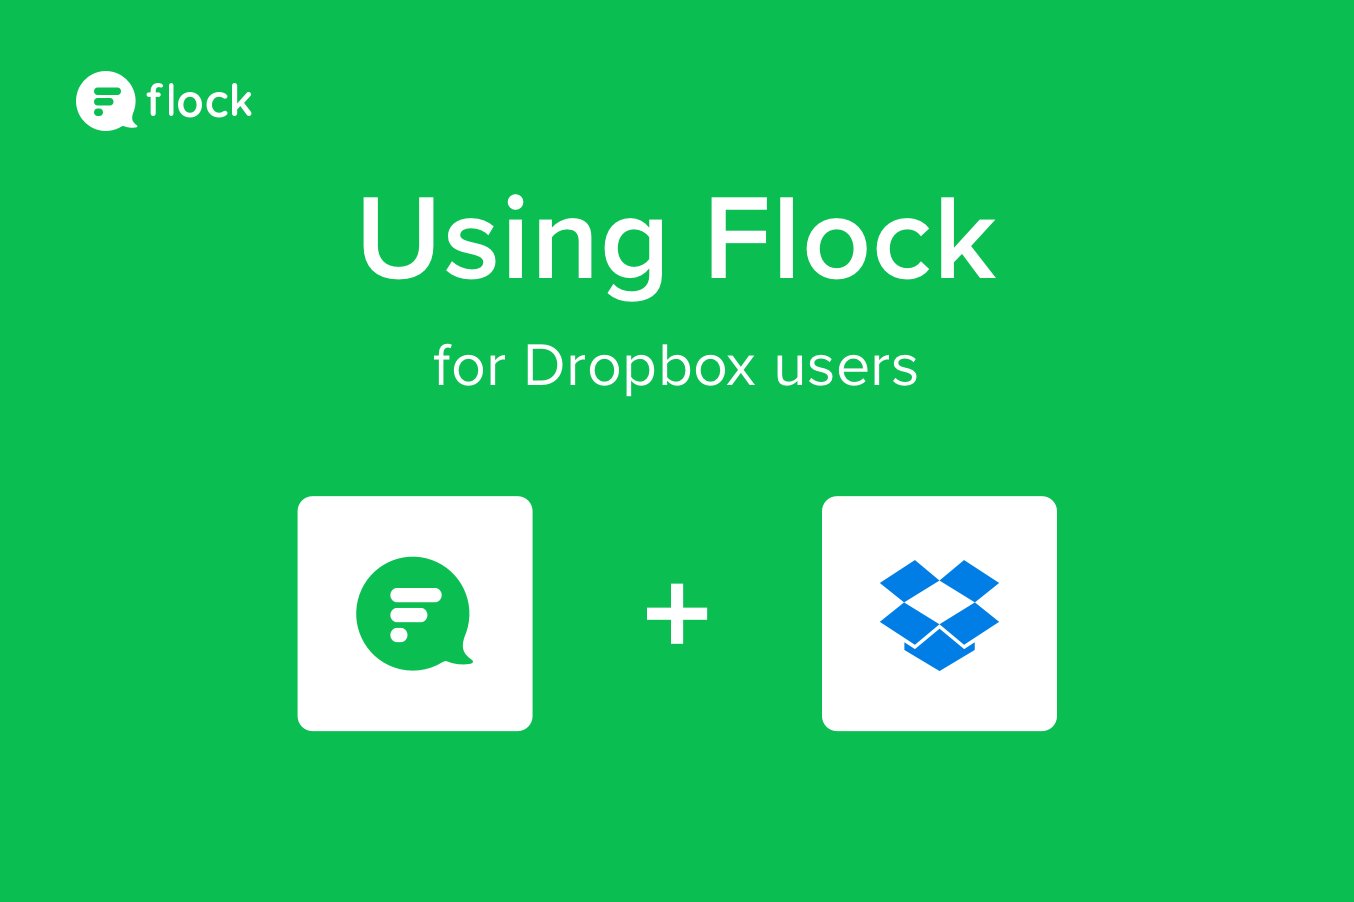 Bring your files and conversations together with Dropbox and Flock